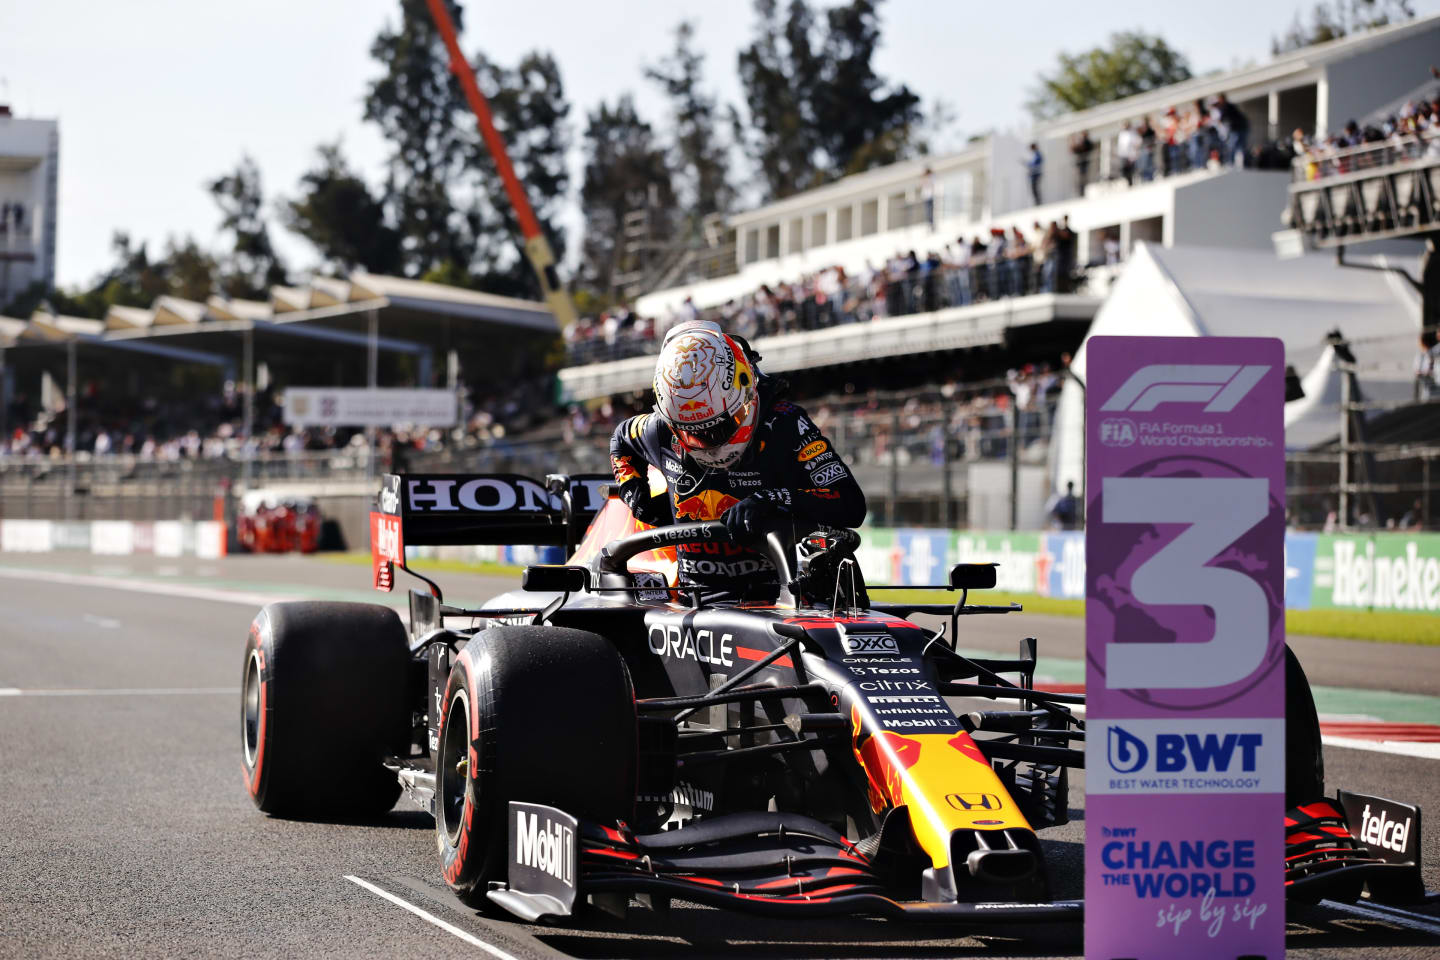 MEXICO CITY, MEXICO - NOVEMBER 06: Third place qualifier Max Verstappen of Netherlands and Red Bull Racing climbs from his car in parc ferme during qualifying ahead of the F1 Grand Prix of Mexico at Autodromo Hermanos Rodriguez on November 06, 2021 in Mexico City, Mexico. (Photo by Francisco Guasco - Pool/Getty Images)